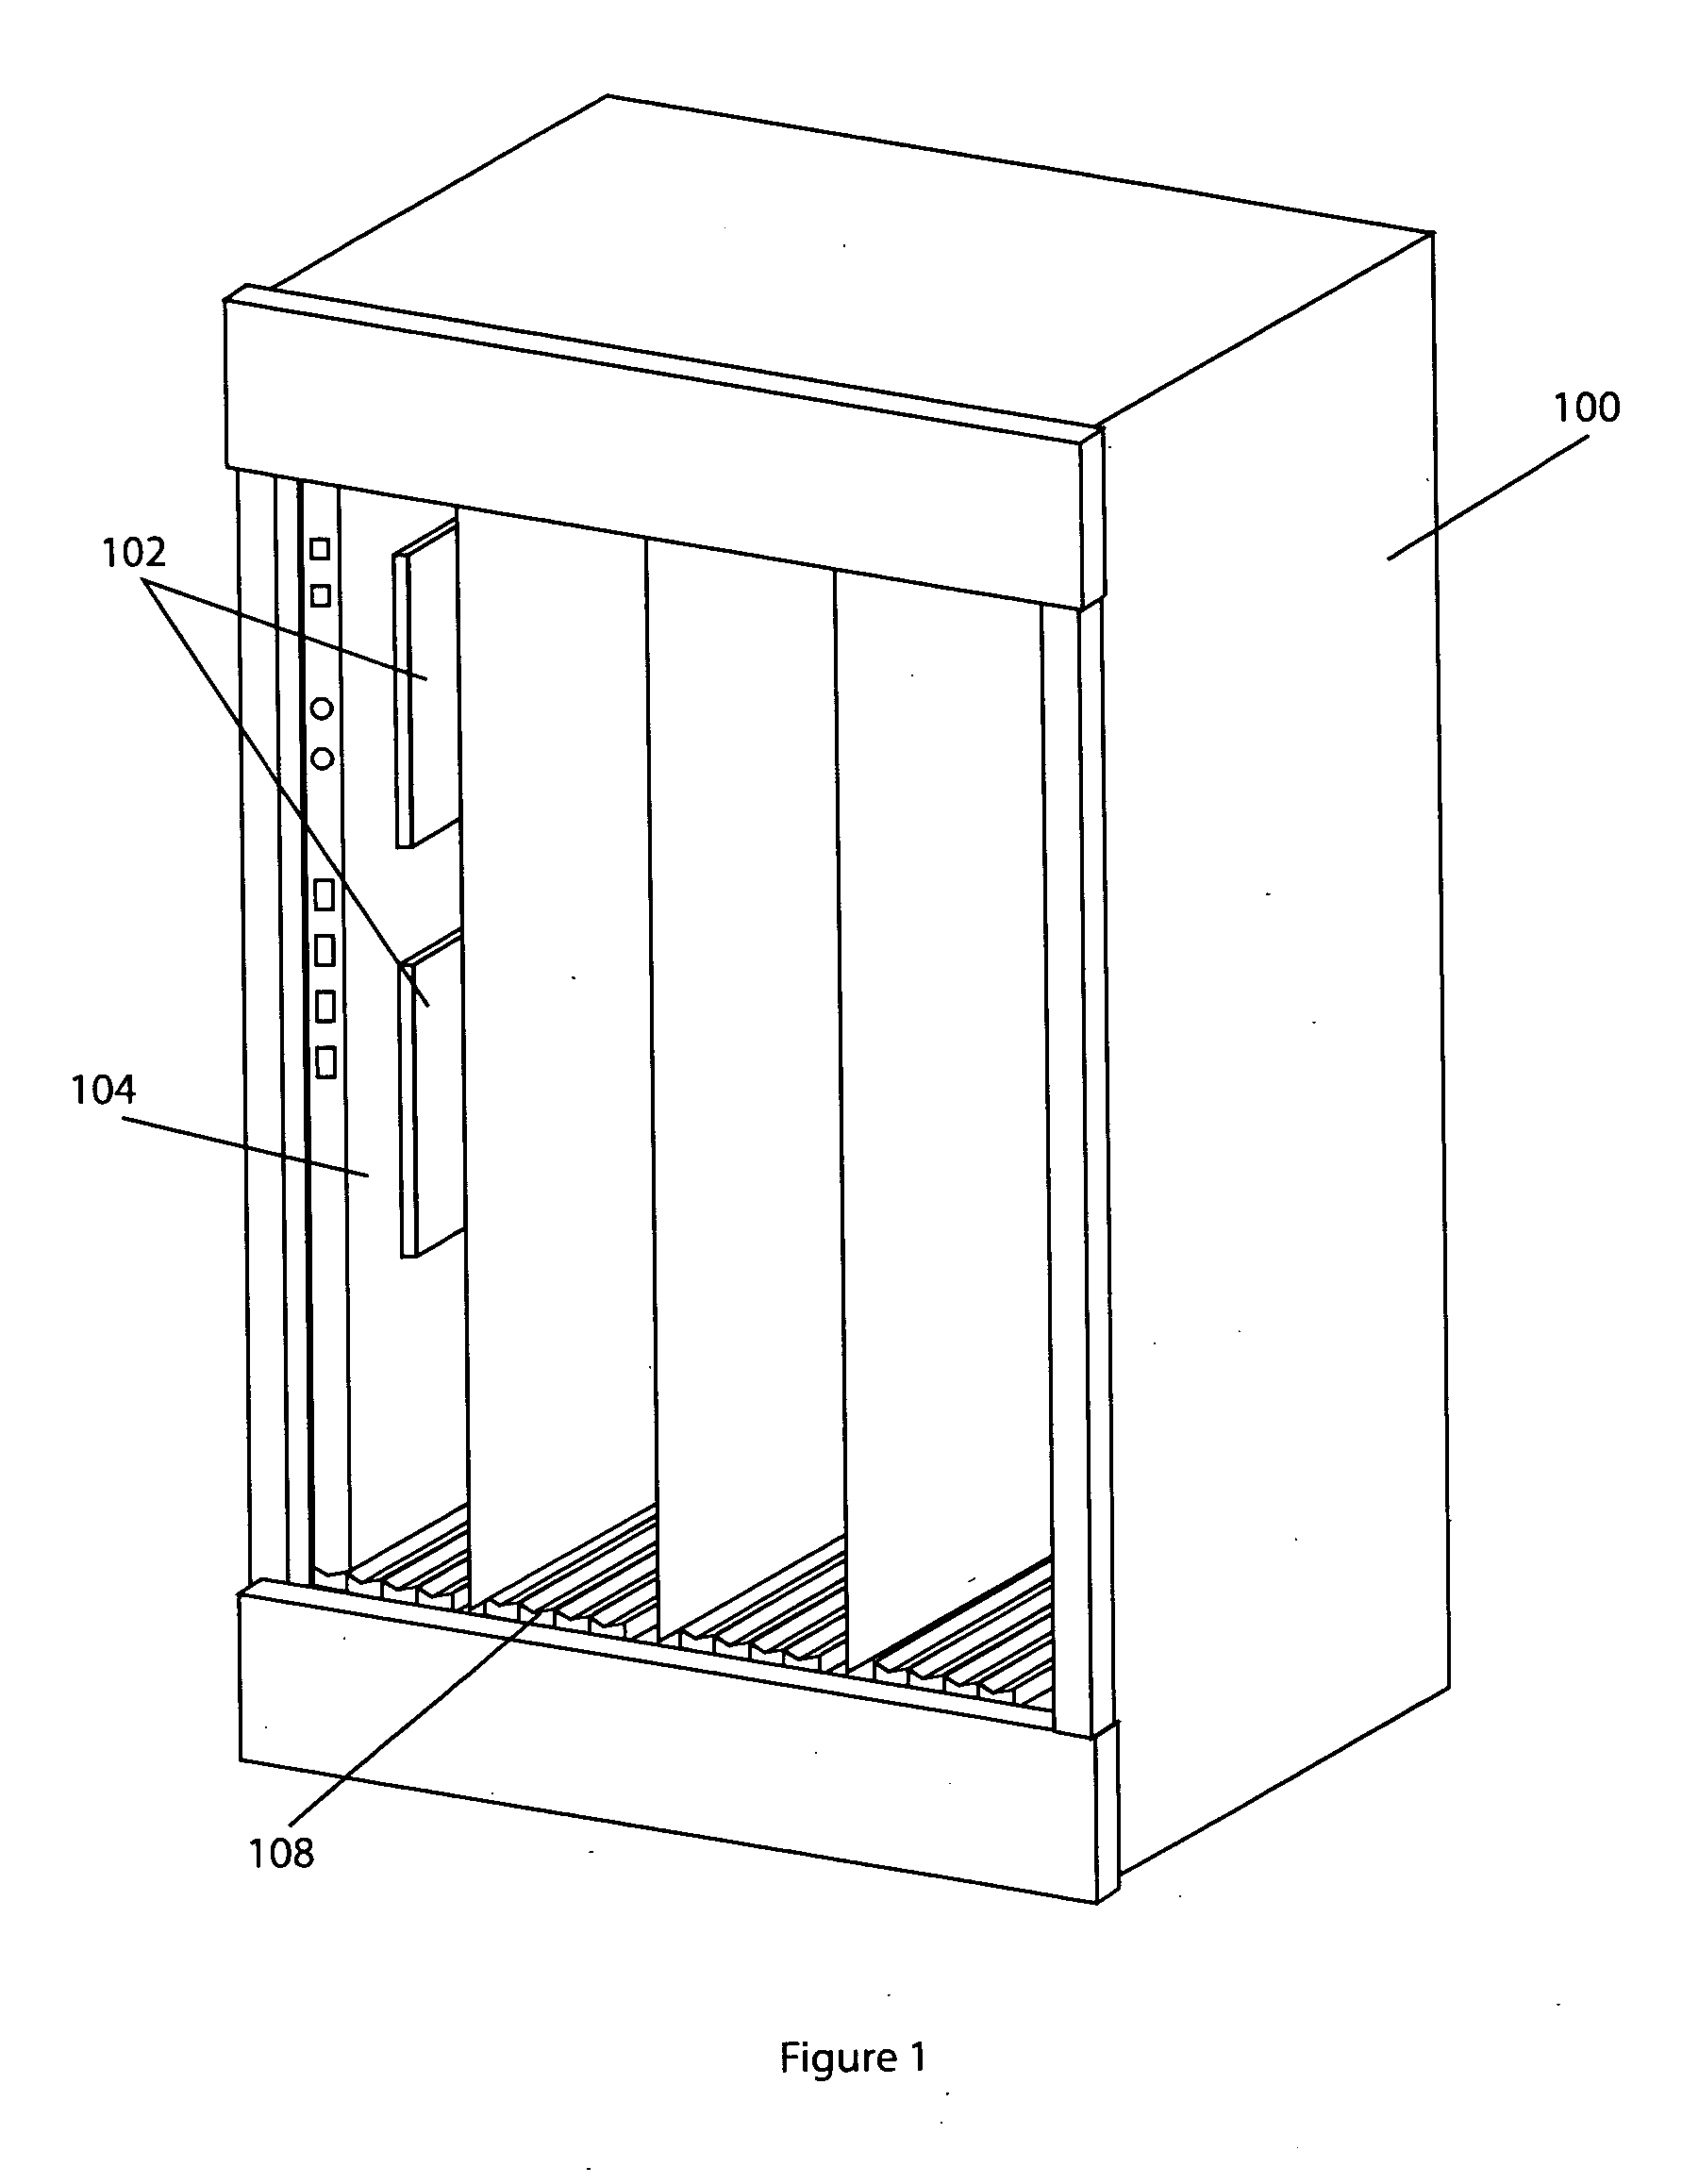 Method & apparatus for retarding fire in a telecommunications box